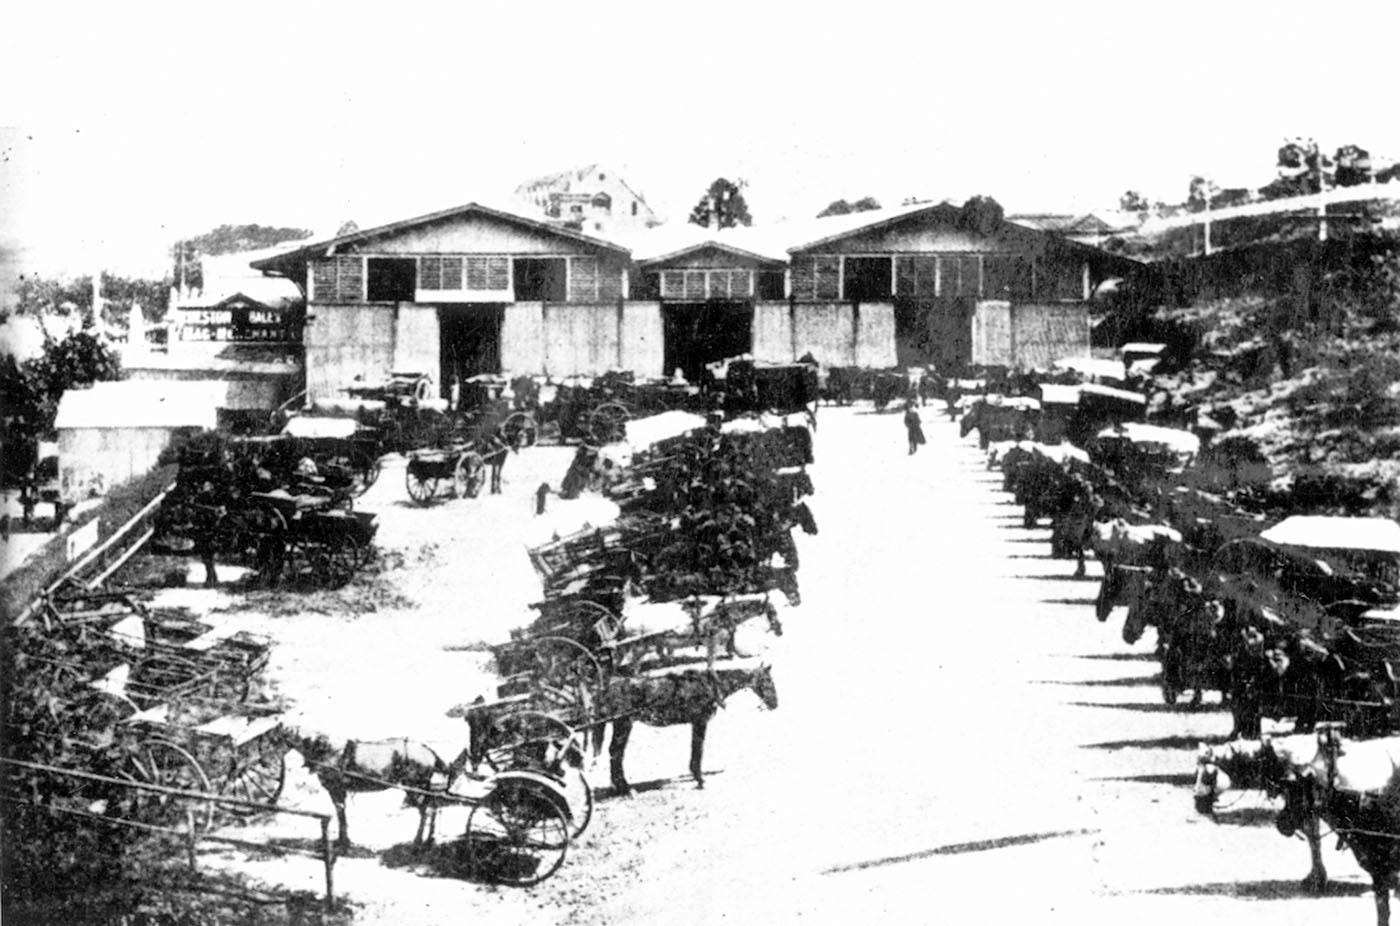 Old Roma Street Markets with horses and carriages in front